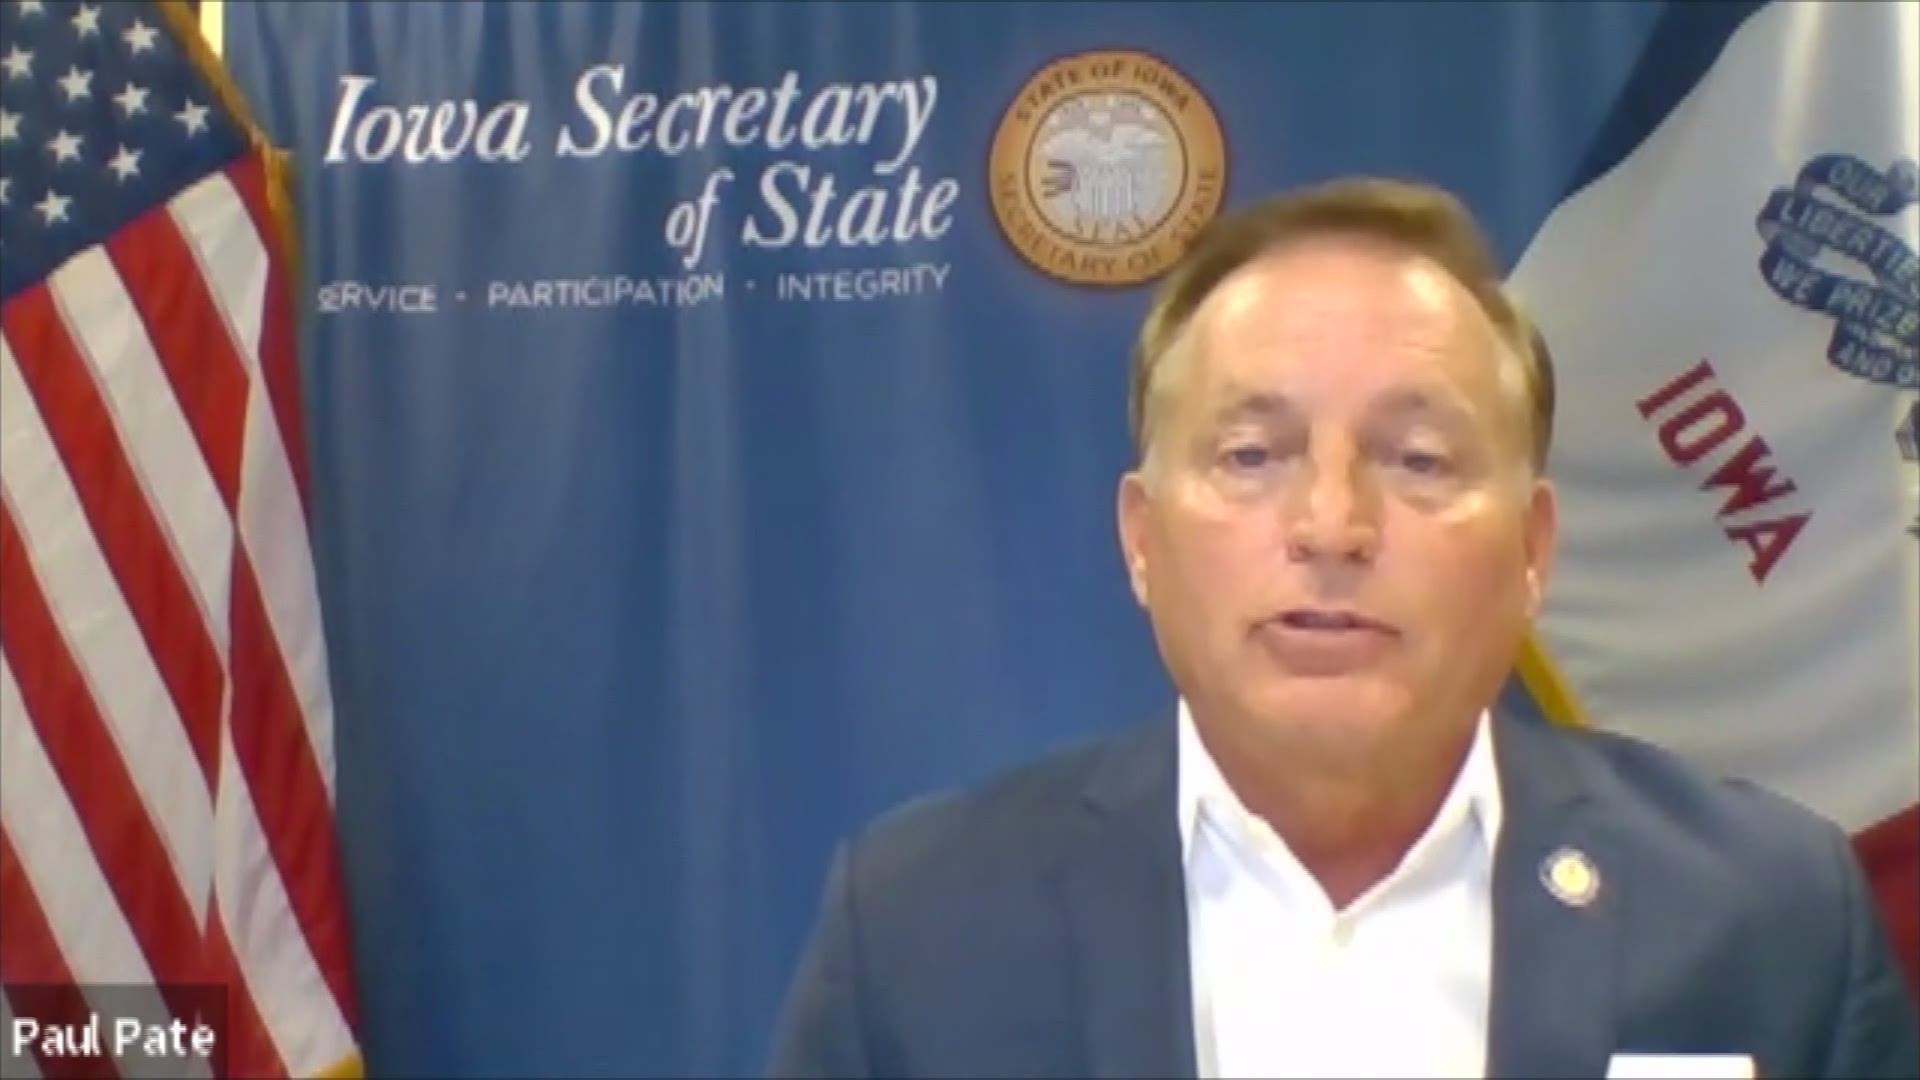 Local 5 sat down with Iowa Secretary of State Paul Pate to answer your questions on early voting, voter ID and other election topics.